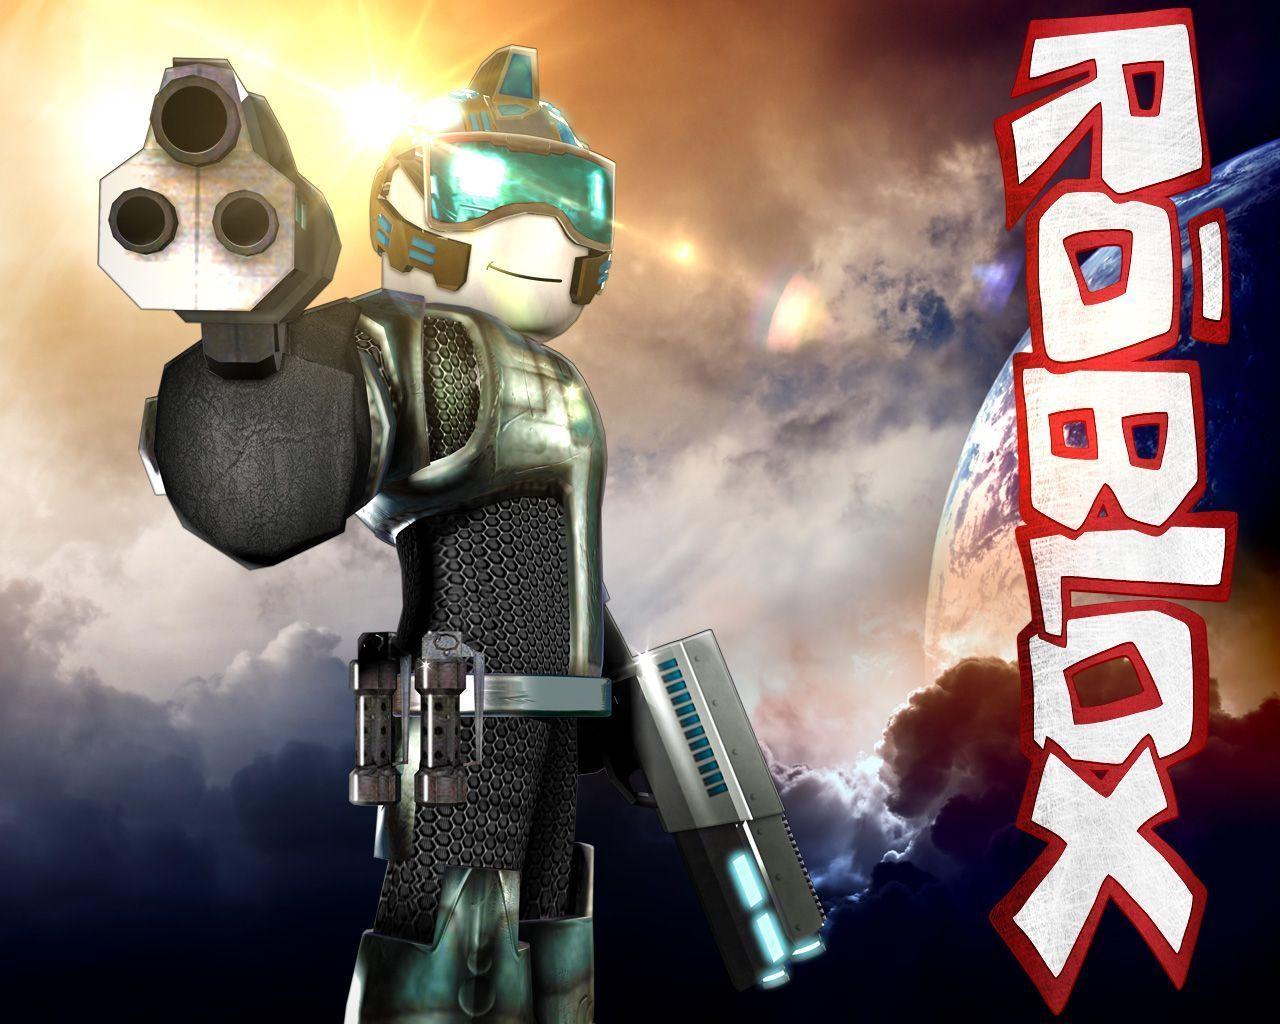 Awesome Roblox Wallpapers Top Free Awesome Roblox Backgrounds Wallpaperaccess - roblox wallpaper hd android